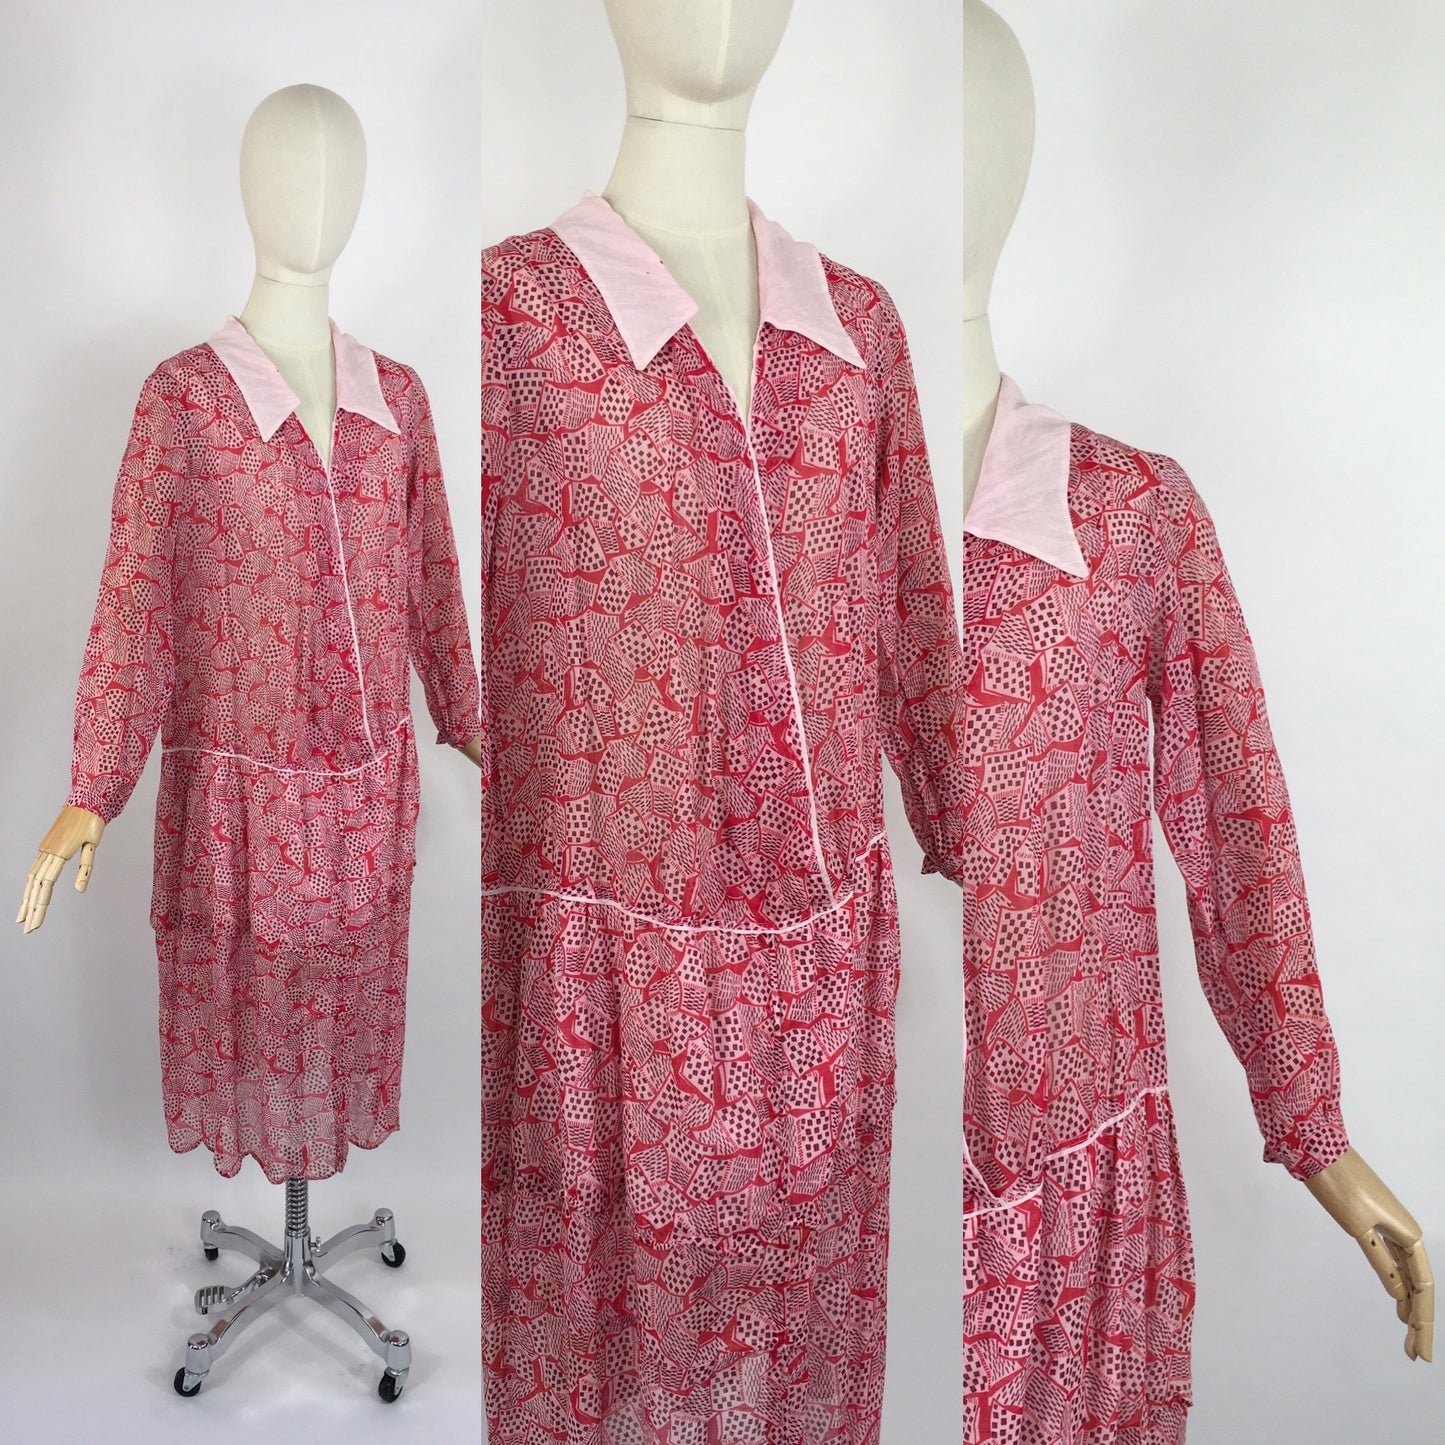 Original Early 1930s Darling Day Dress - In a Fabulous Deco Almost Book Print Cotton Lawn with Scalloped Hem Detailing